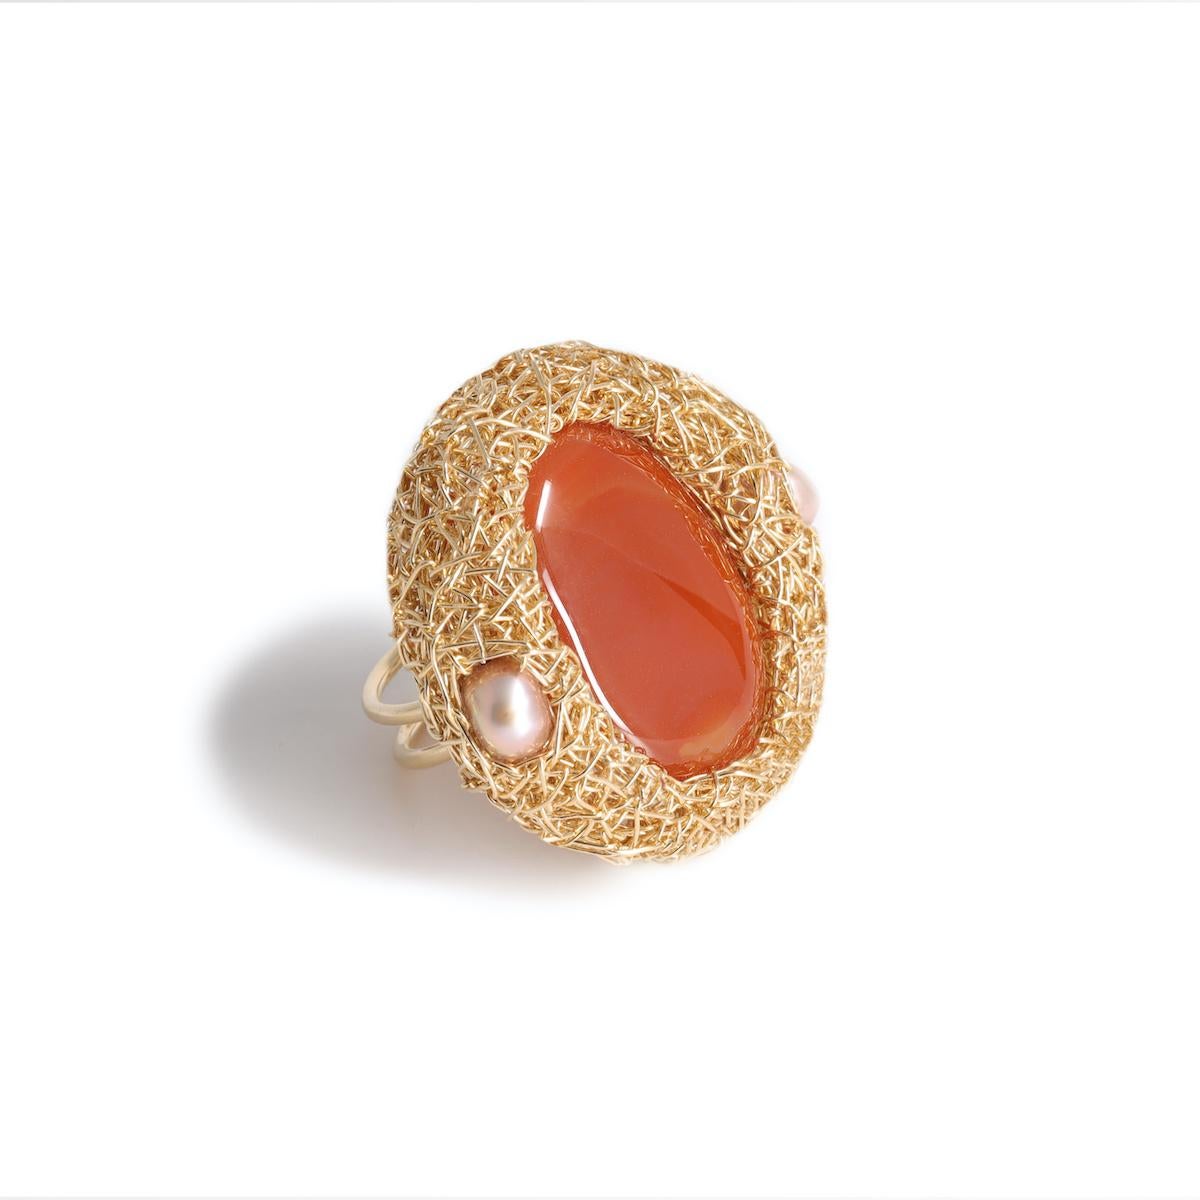 Oval Carnelian and Pearls 14 Kt Gold F. Cocktail Statement Ring by the Artist For Sale 12